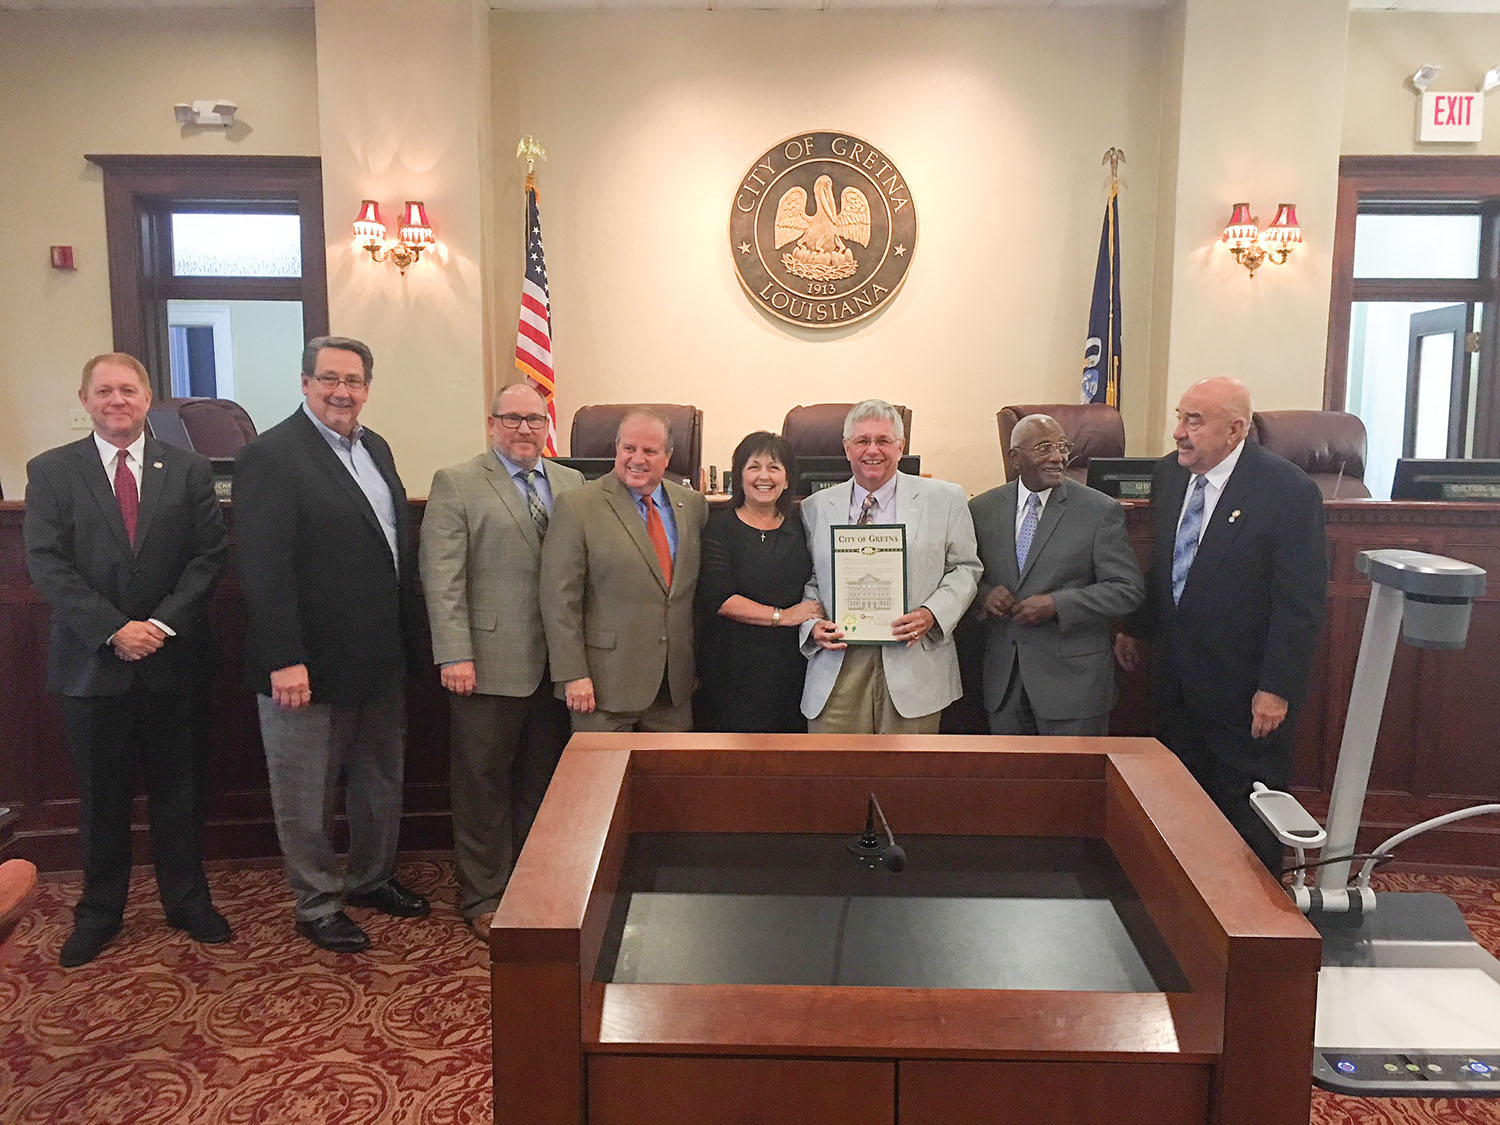 John “Johnny” Stone Jr. received the “Key to the City of Gretna” honor on behalf of John W. Stone Oil Distributors for its emissions reduction initiatives on September 12. (Photo courtesy of John W. Stone Oil Distributors)